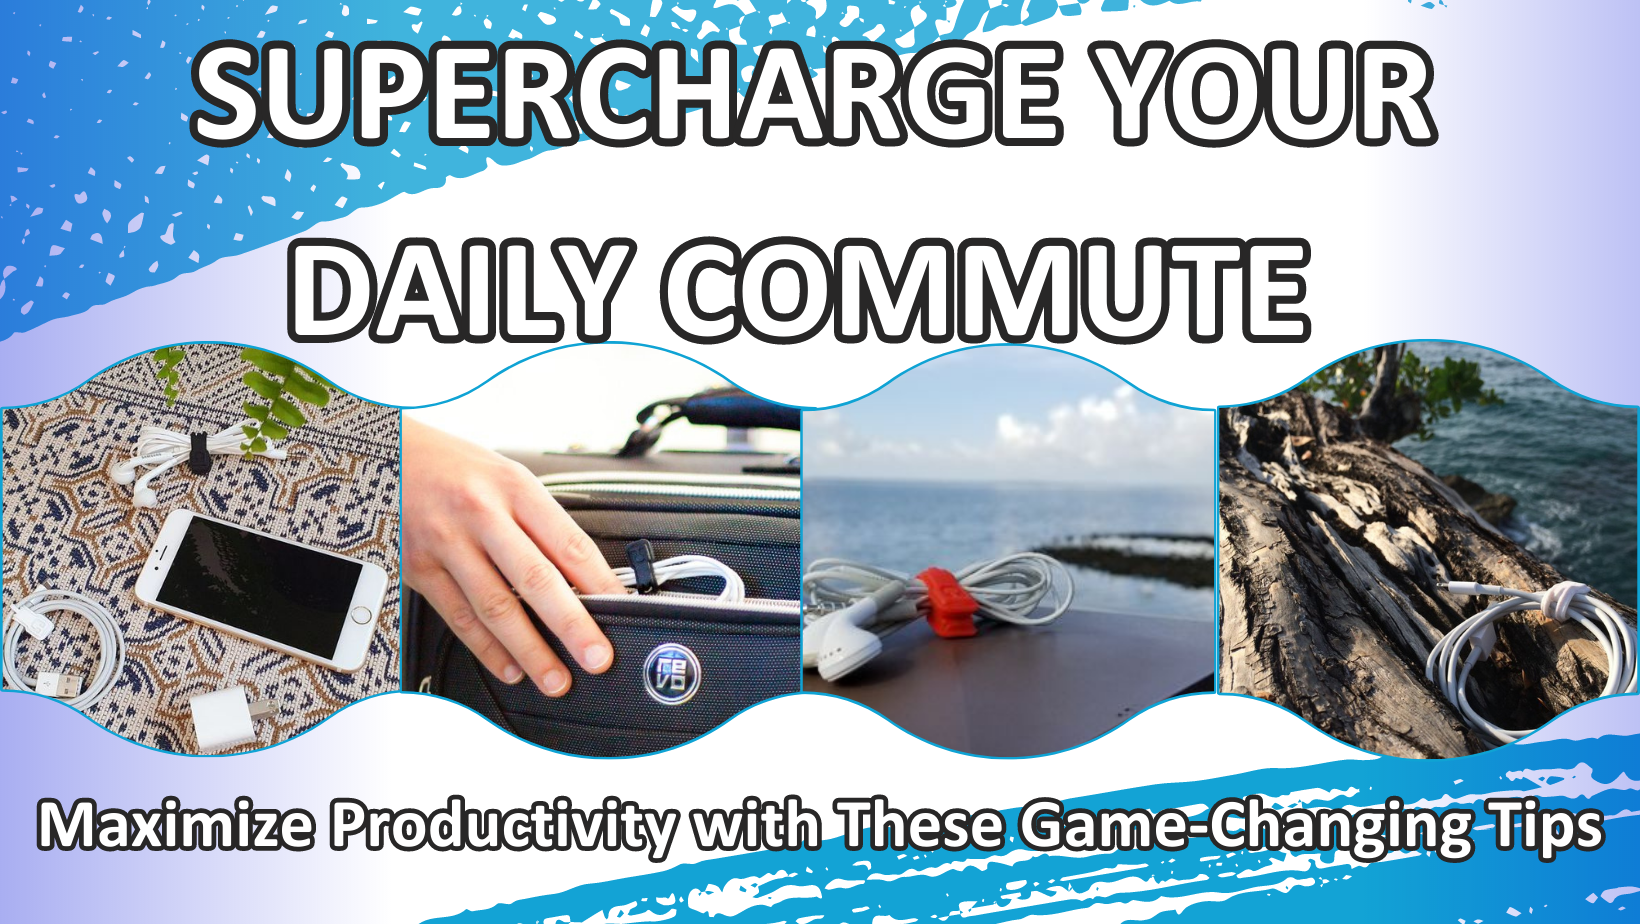 Supercharge Your Daily Commute: Maximize Productivity with These Game-Changing Tips